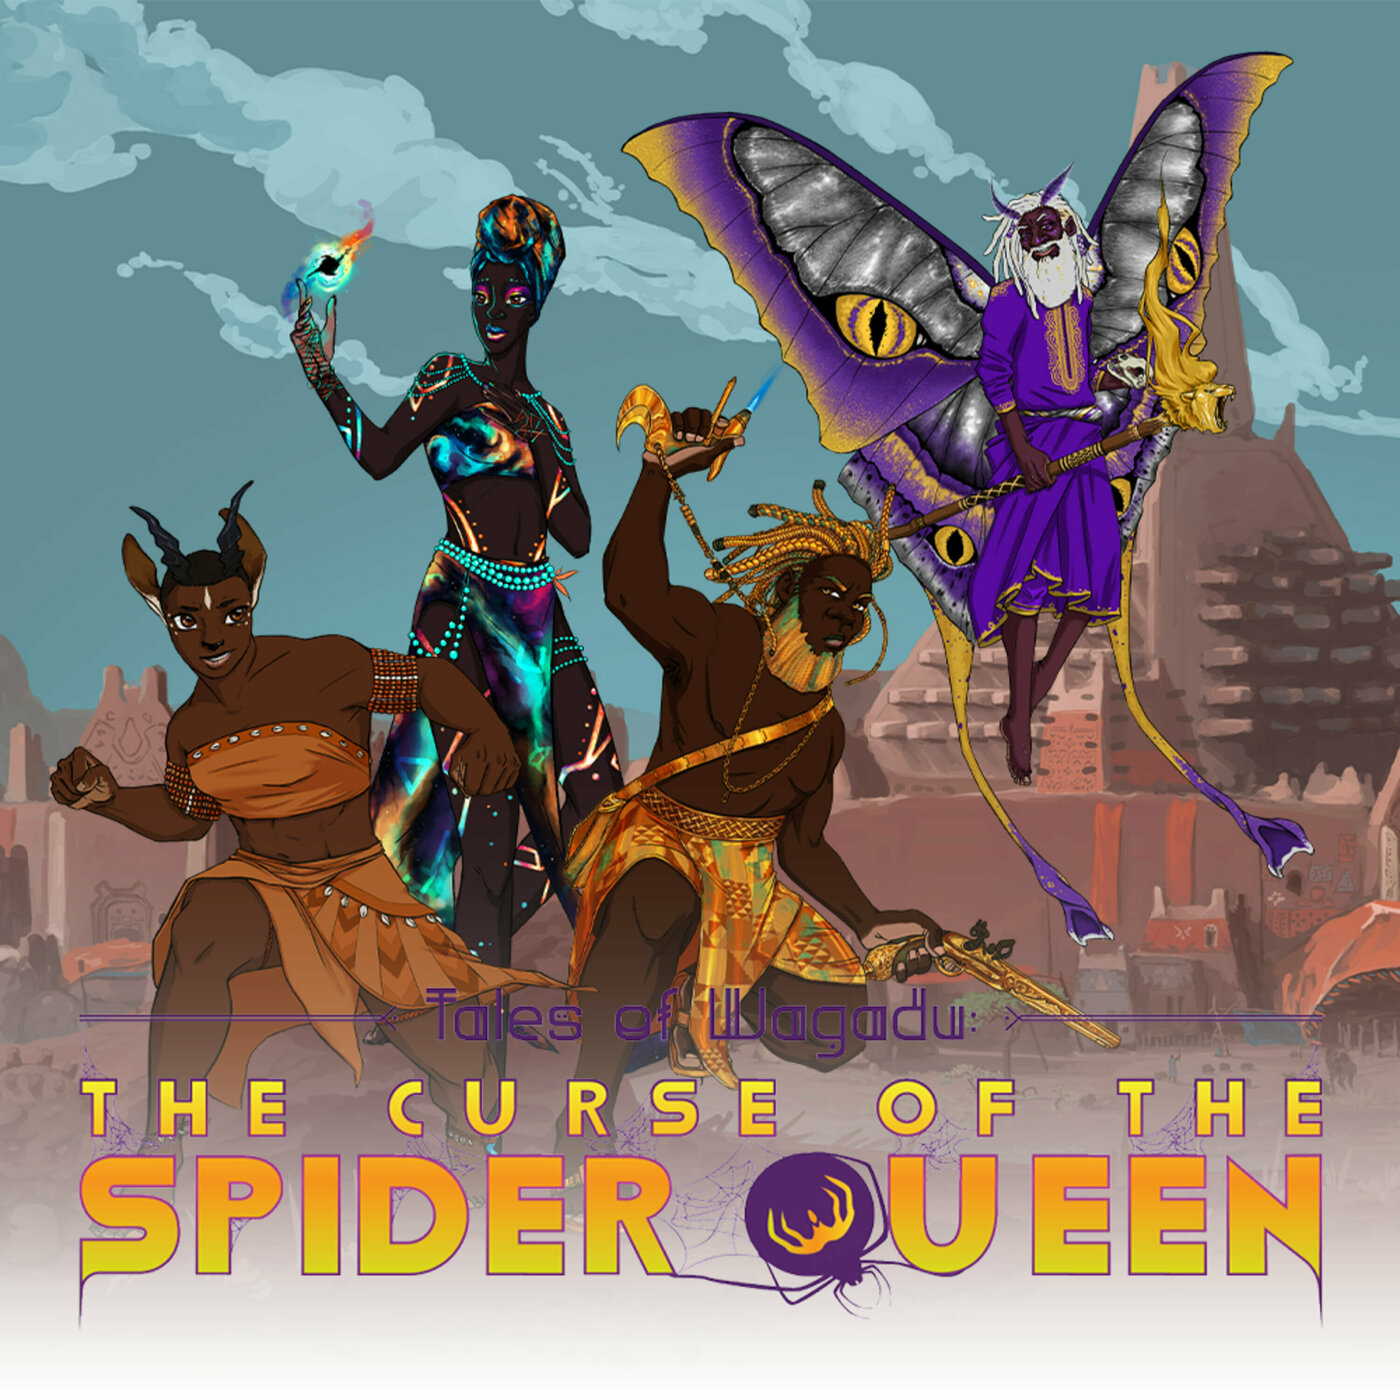 Tales of Wagadu: The Curse of the Spider Queen Ep. 15 